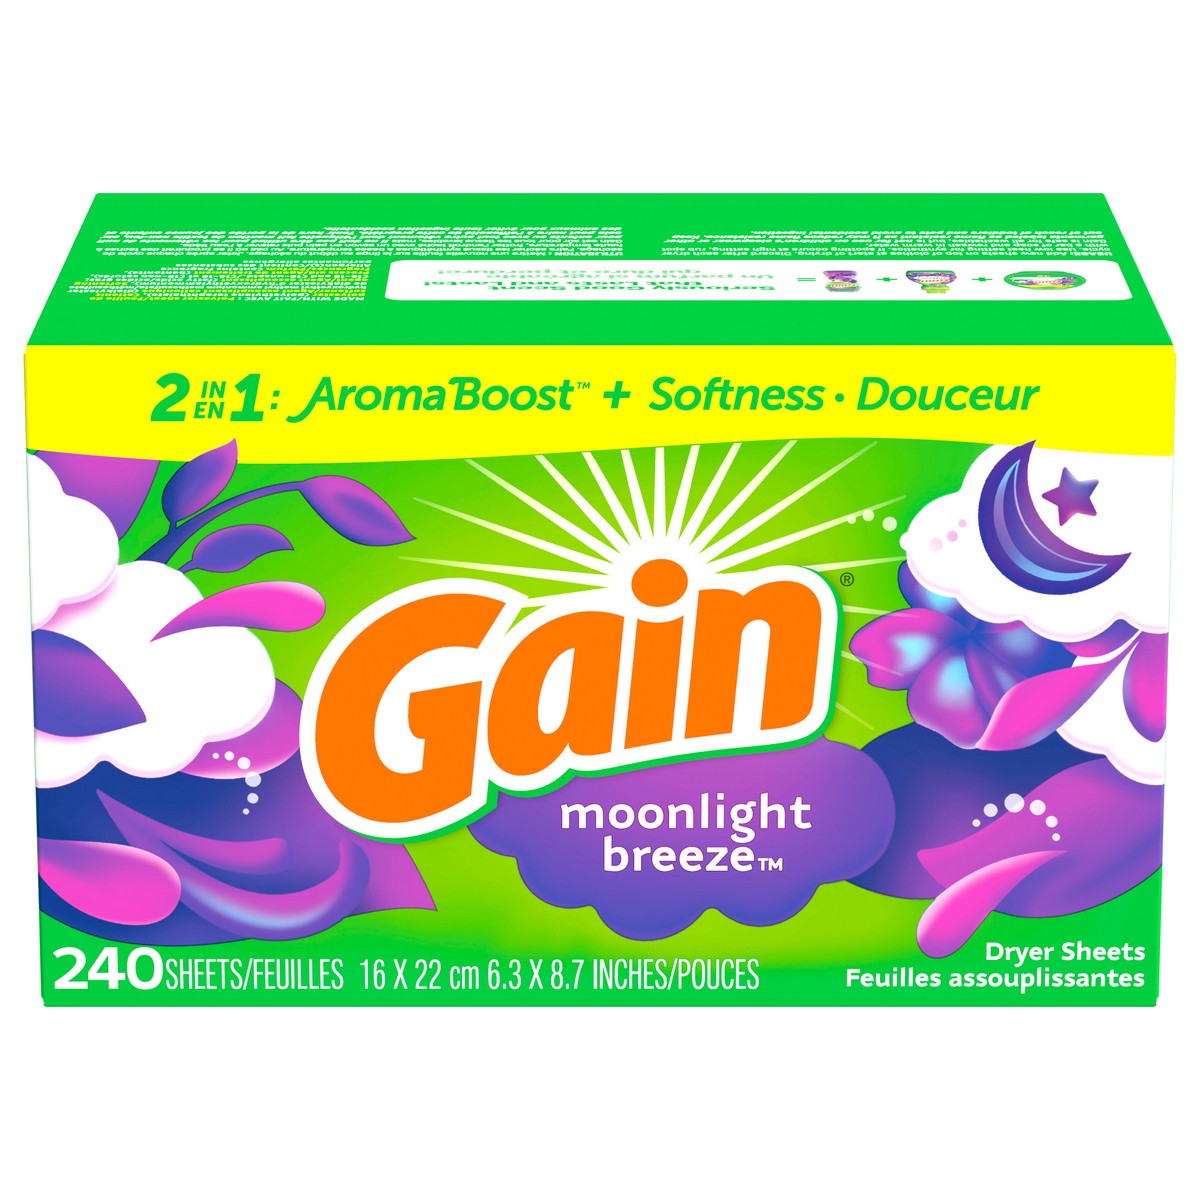 slide 3 of 12, Gain dryer sheets, 240 Count, Moonlight Breeze Scent Laundry Fabric Softener Sheets with 2-in-1 Aromaboost Plus Softness, 240 ct